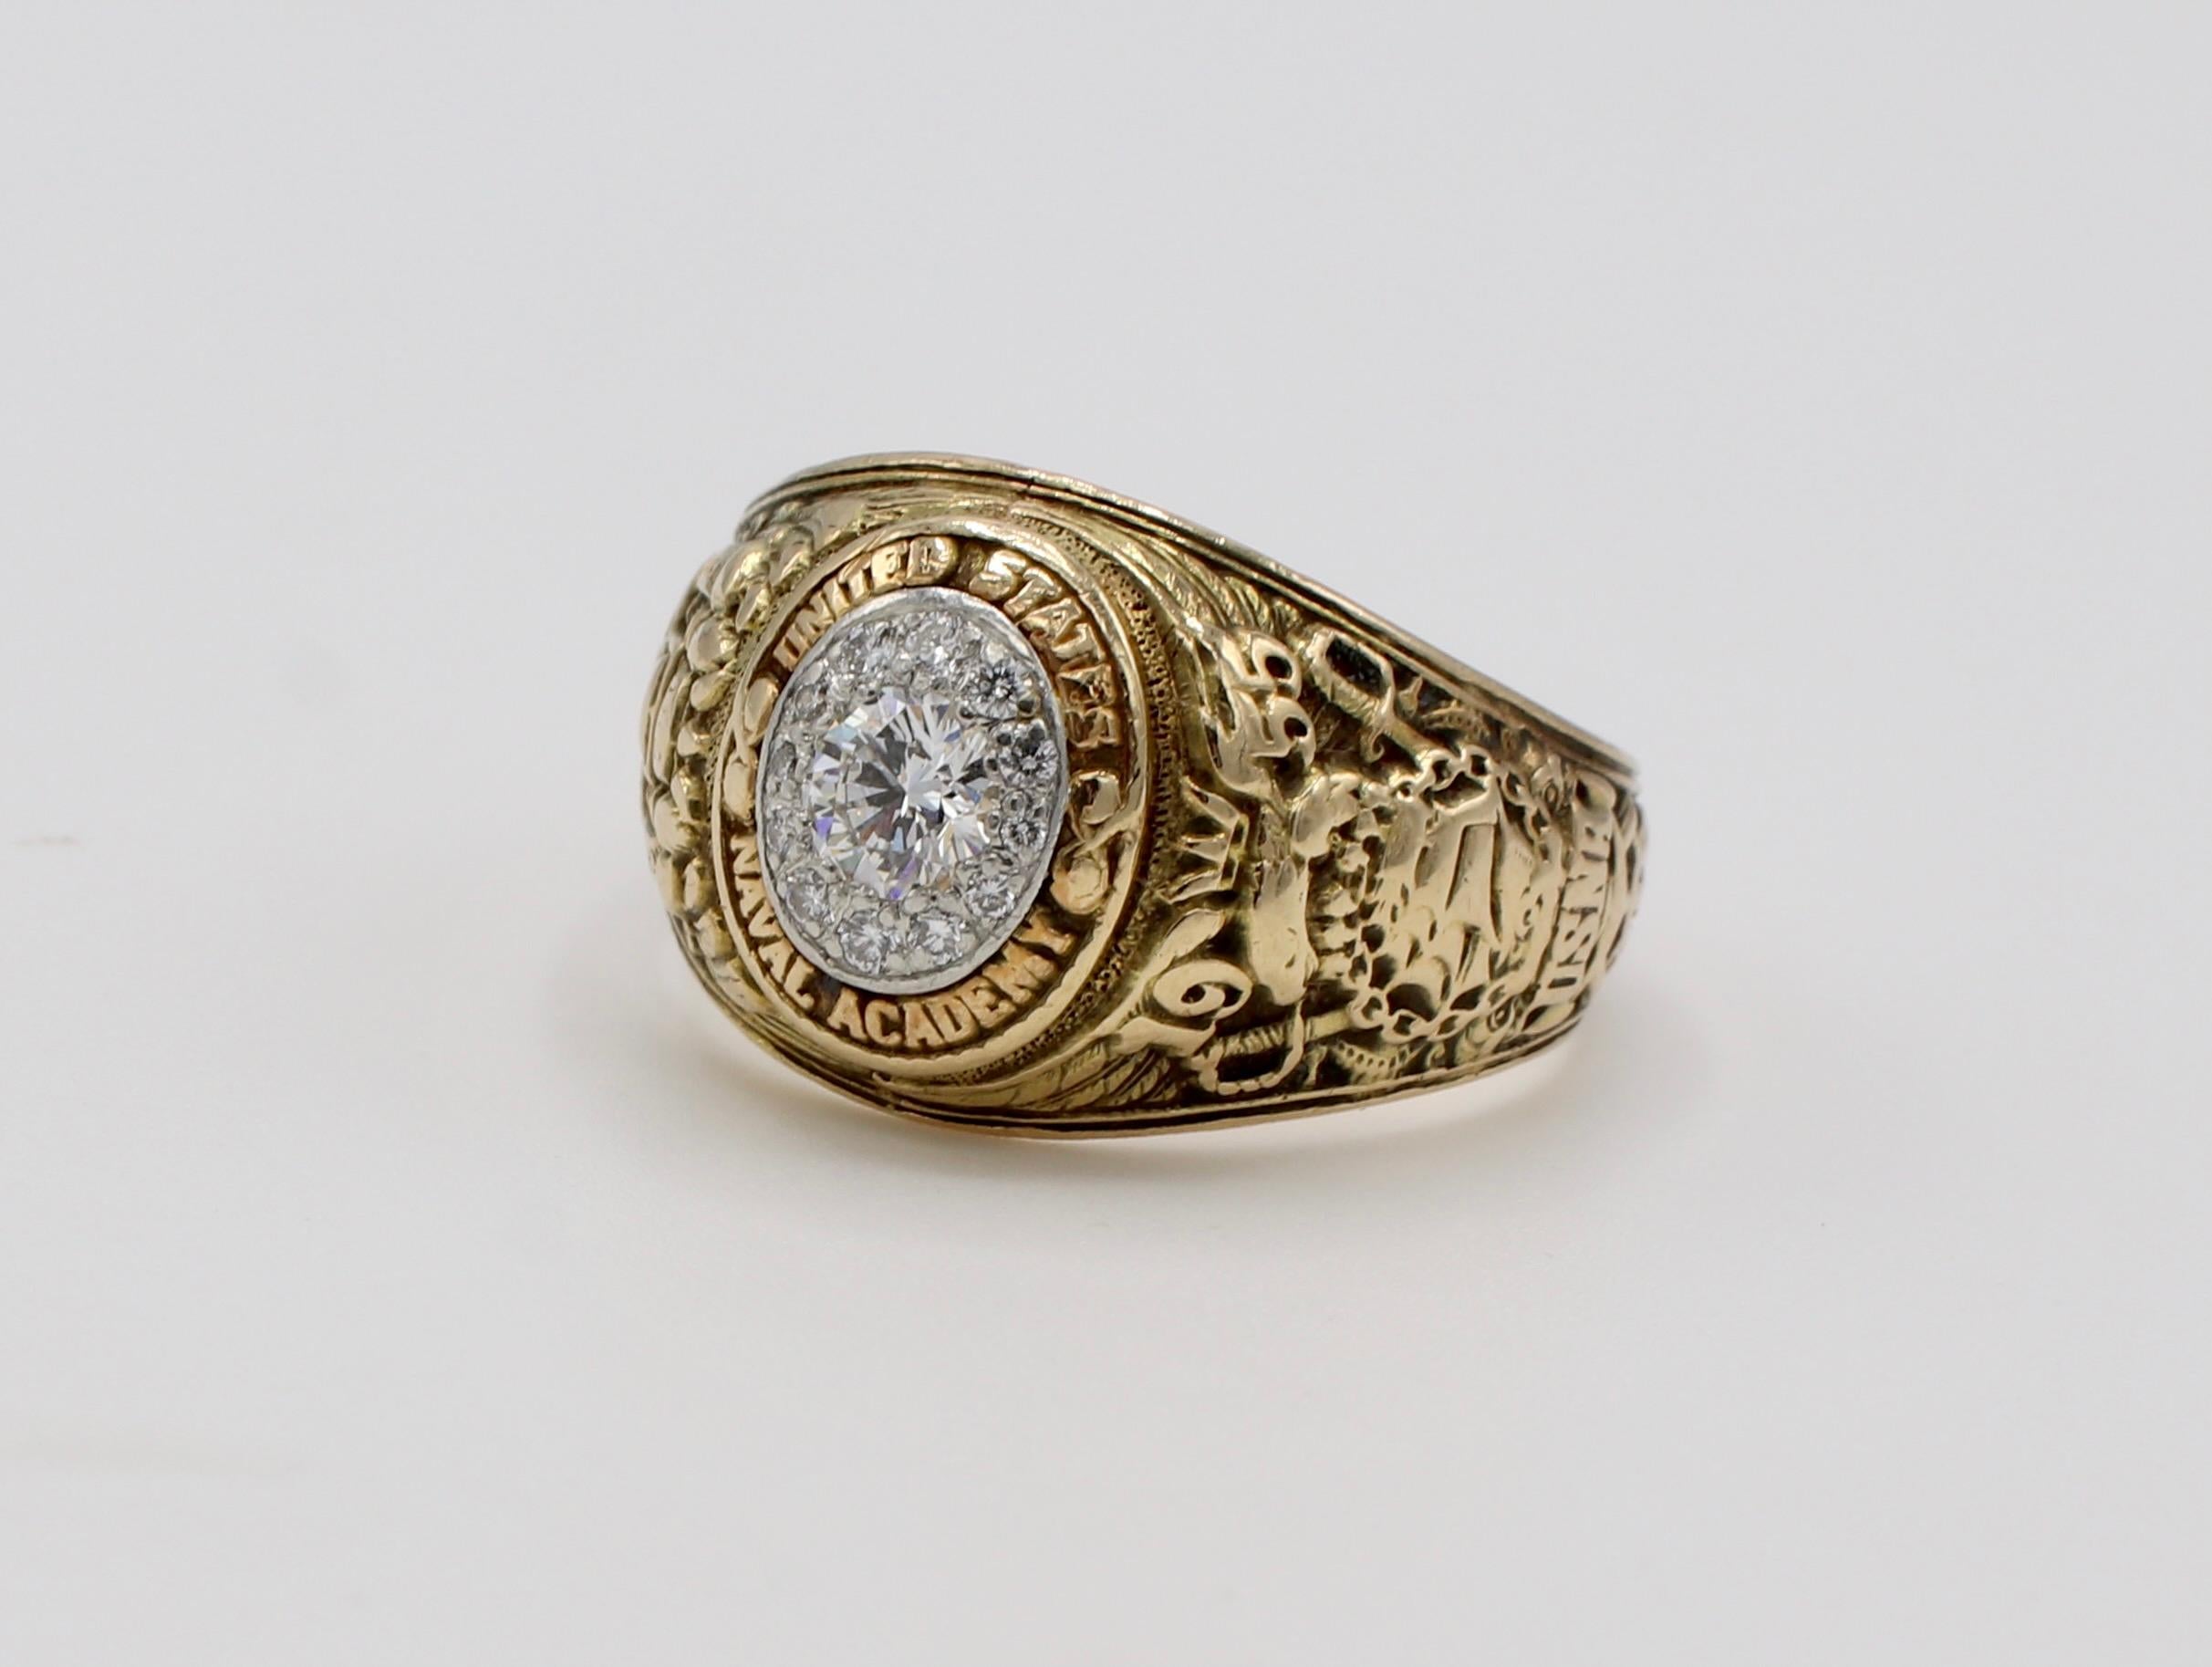 United States Naval Academy 1955 .40 CTW Diamond Bailey Banks & Biddle Class Ring Size 9
Metal: 14k yellow gold / platinum 
Weight: 10.5 grams
Diamonds: Approx. .40 CTW G VS (center diamond is approx. .25 carat)
Size: 9
Signed: BBB
Top of ring